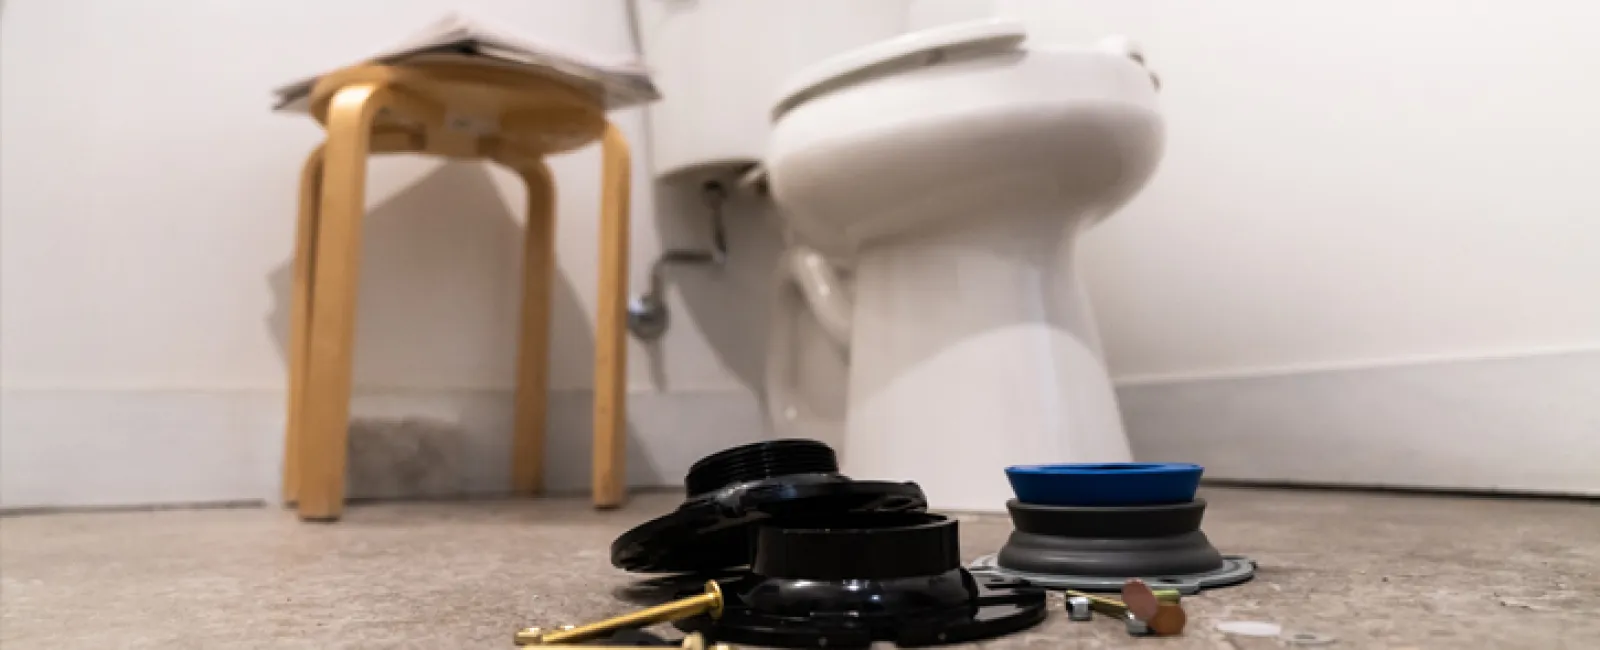 How to Replace Toilet Flange